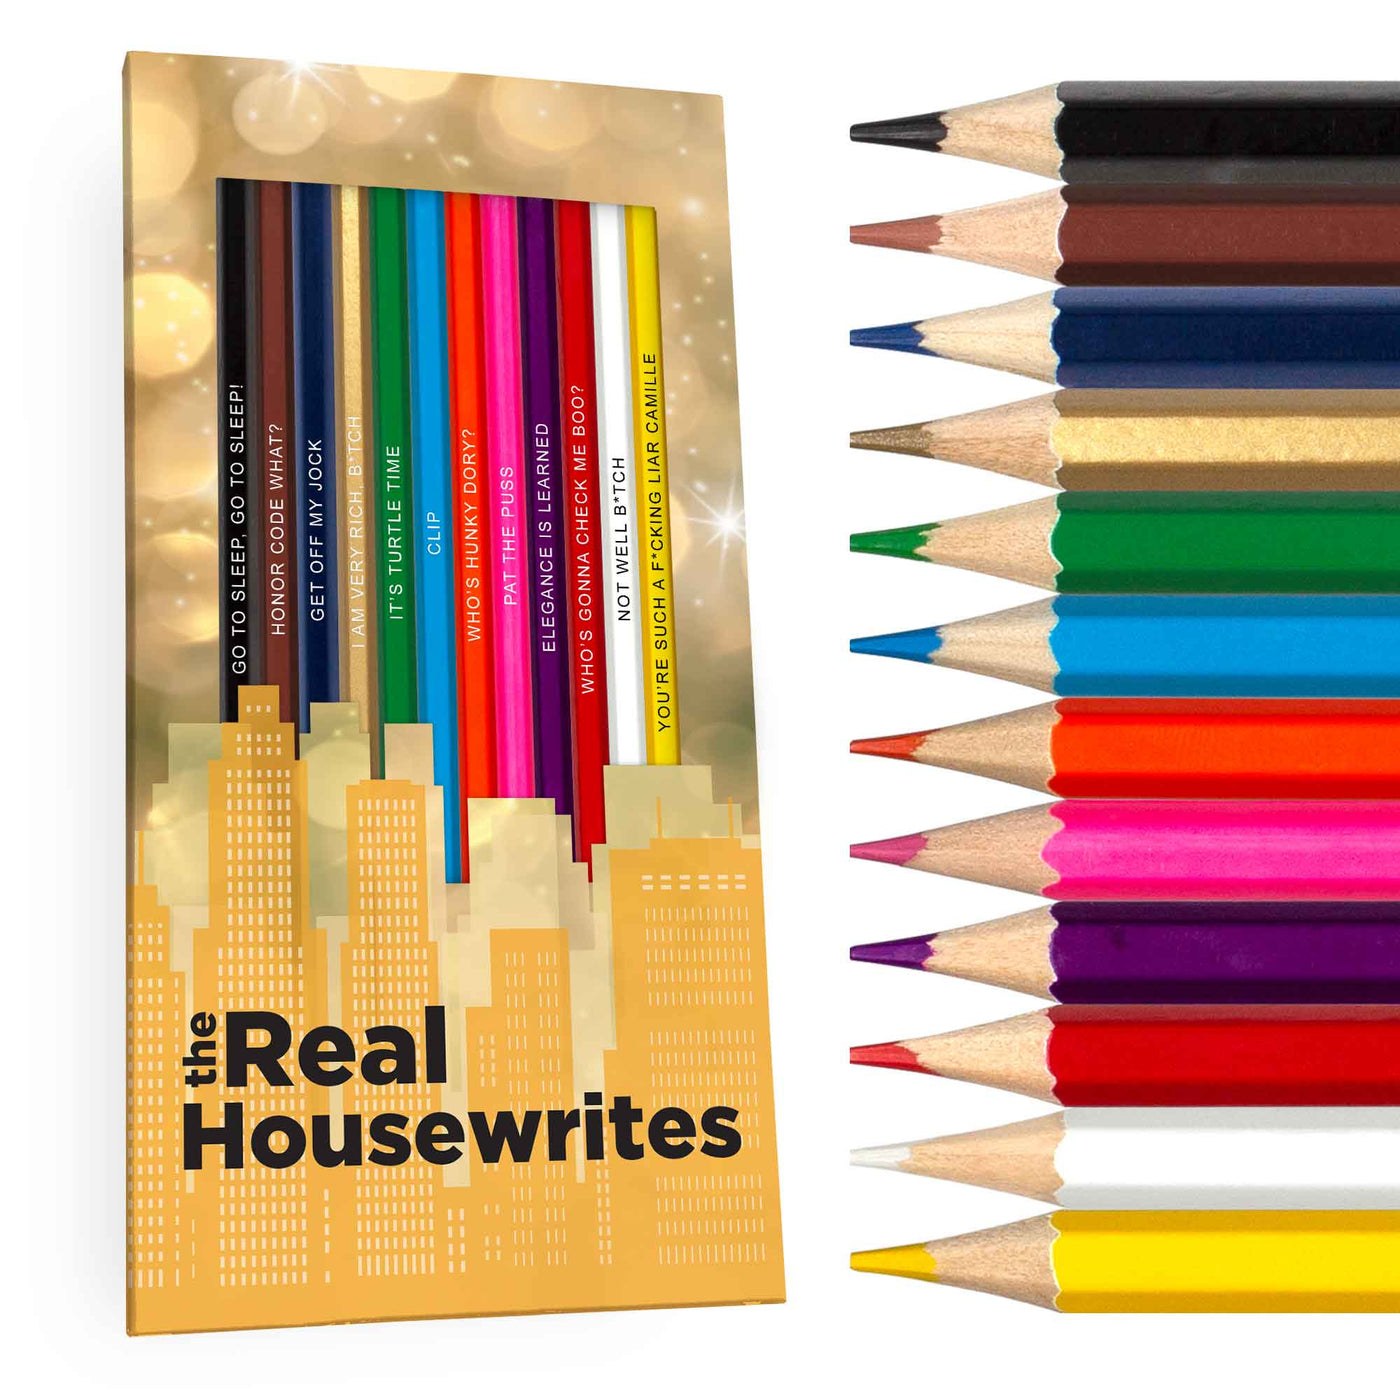 The Real Housewrites Colored Pencils Set for Fans of The Real Housewives. Display Box and Pencils